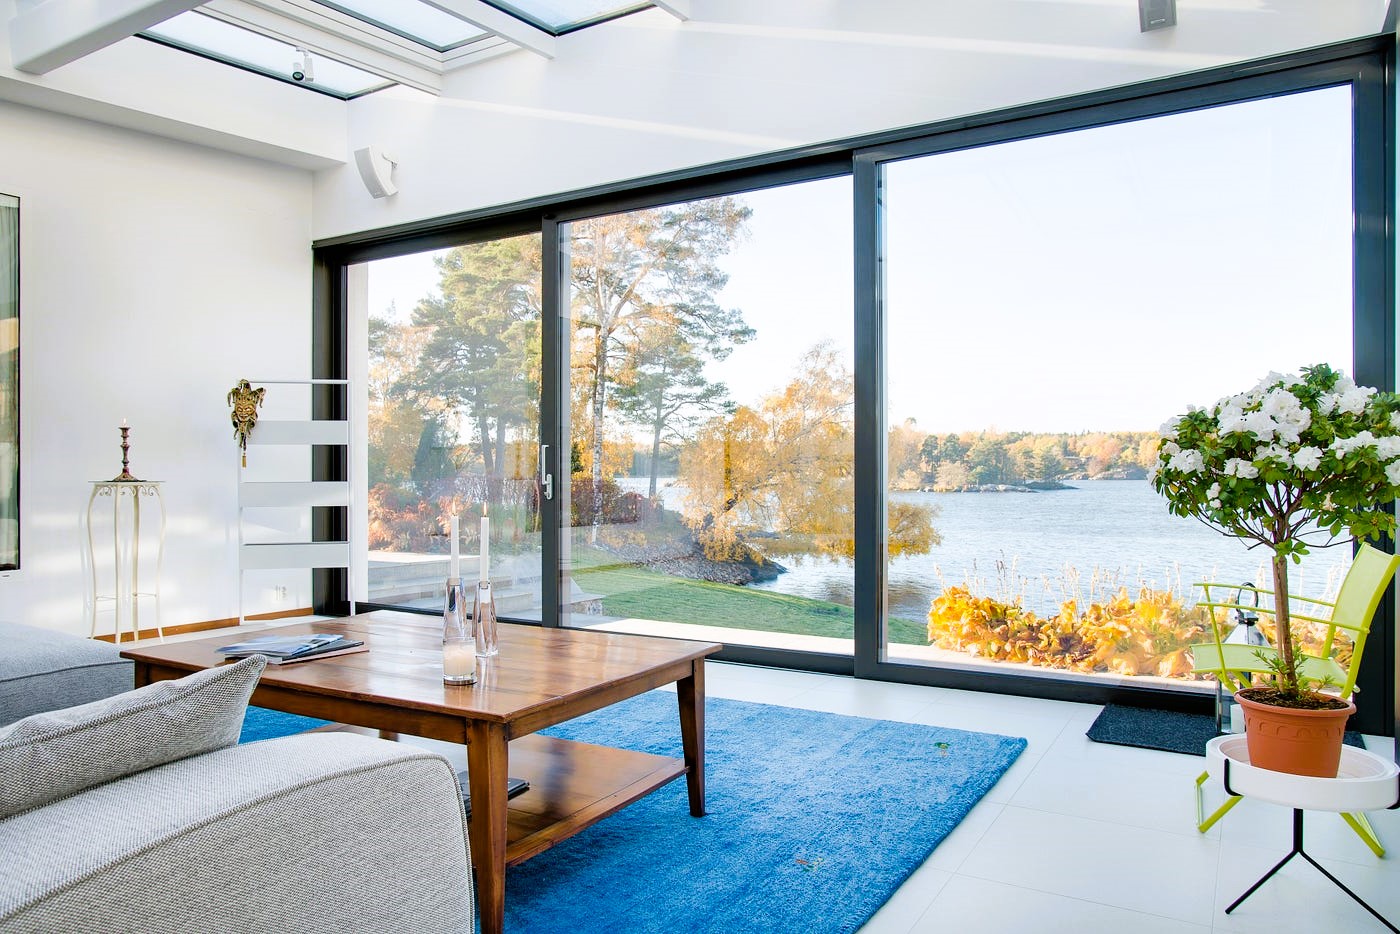 Panoramic windows in the living room